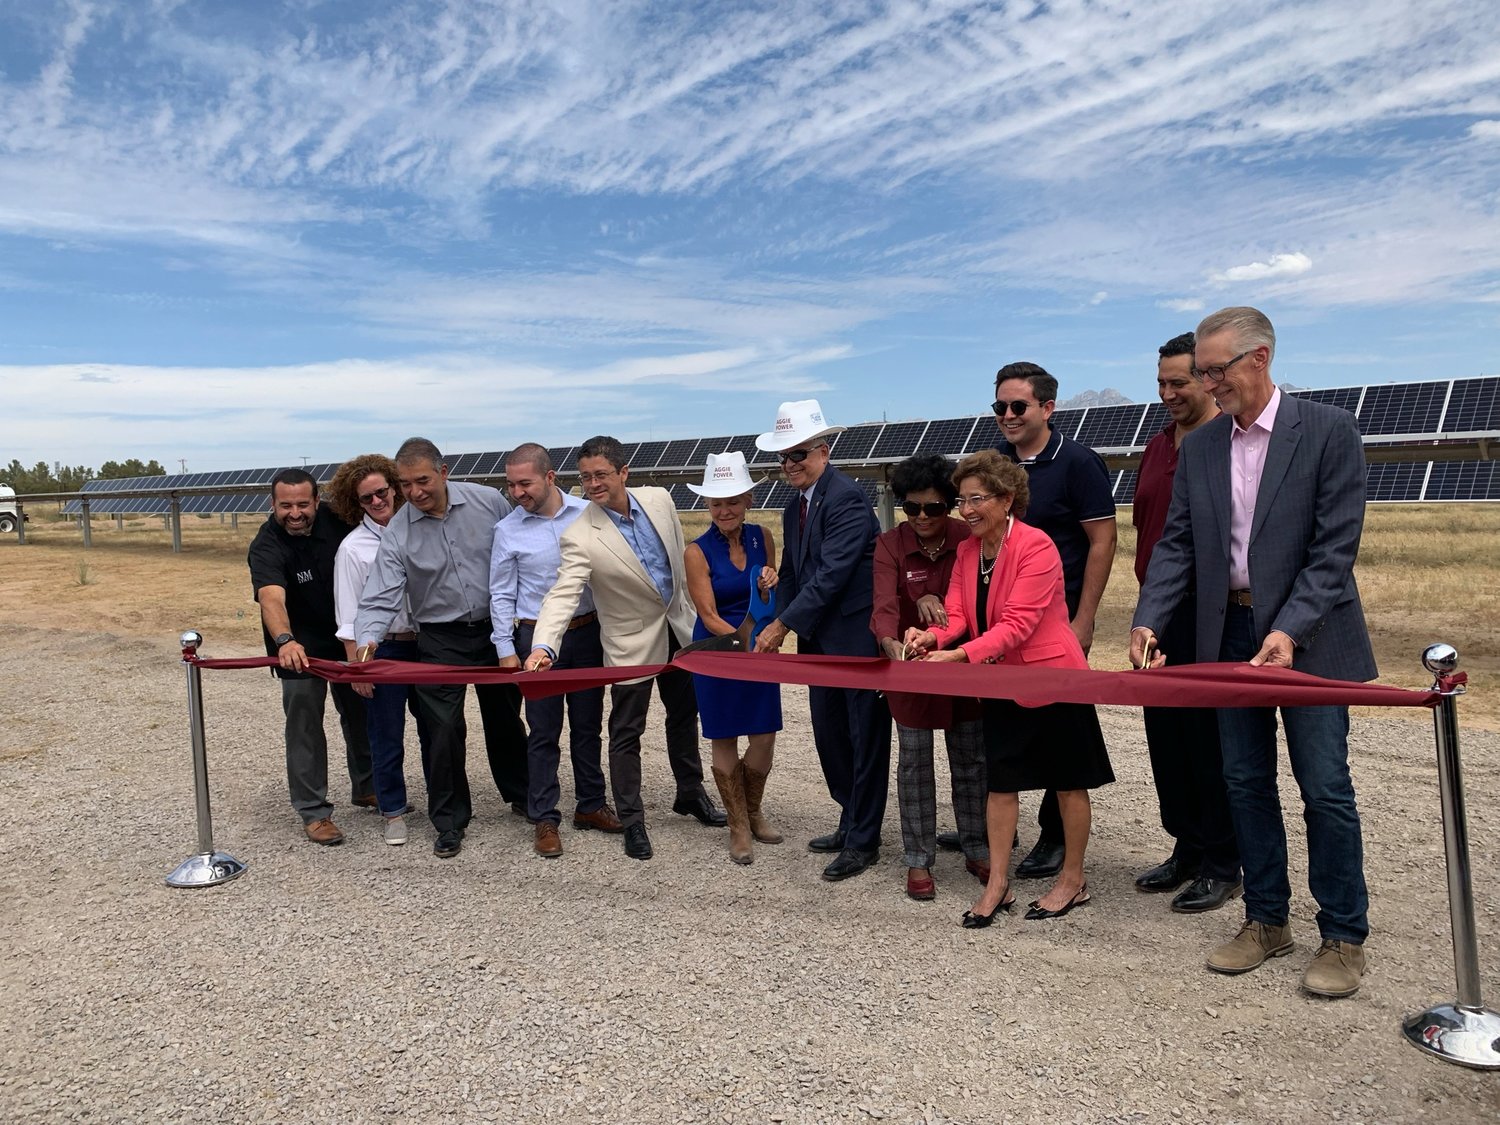 Officials cut the ribbon officially opening the Aggie Power, a planned 3-megawatt solar photovoltaic facility with about 10,000 solar panels on NMSU’s Arrowhead Park.